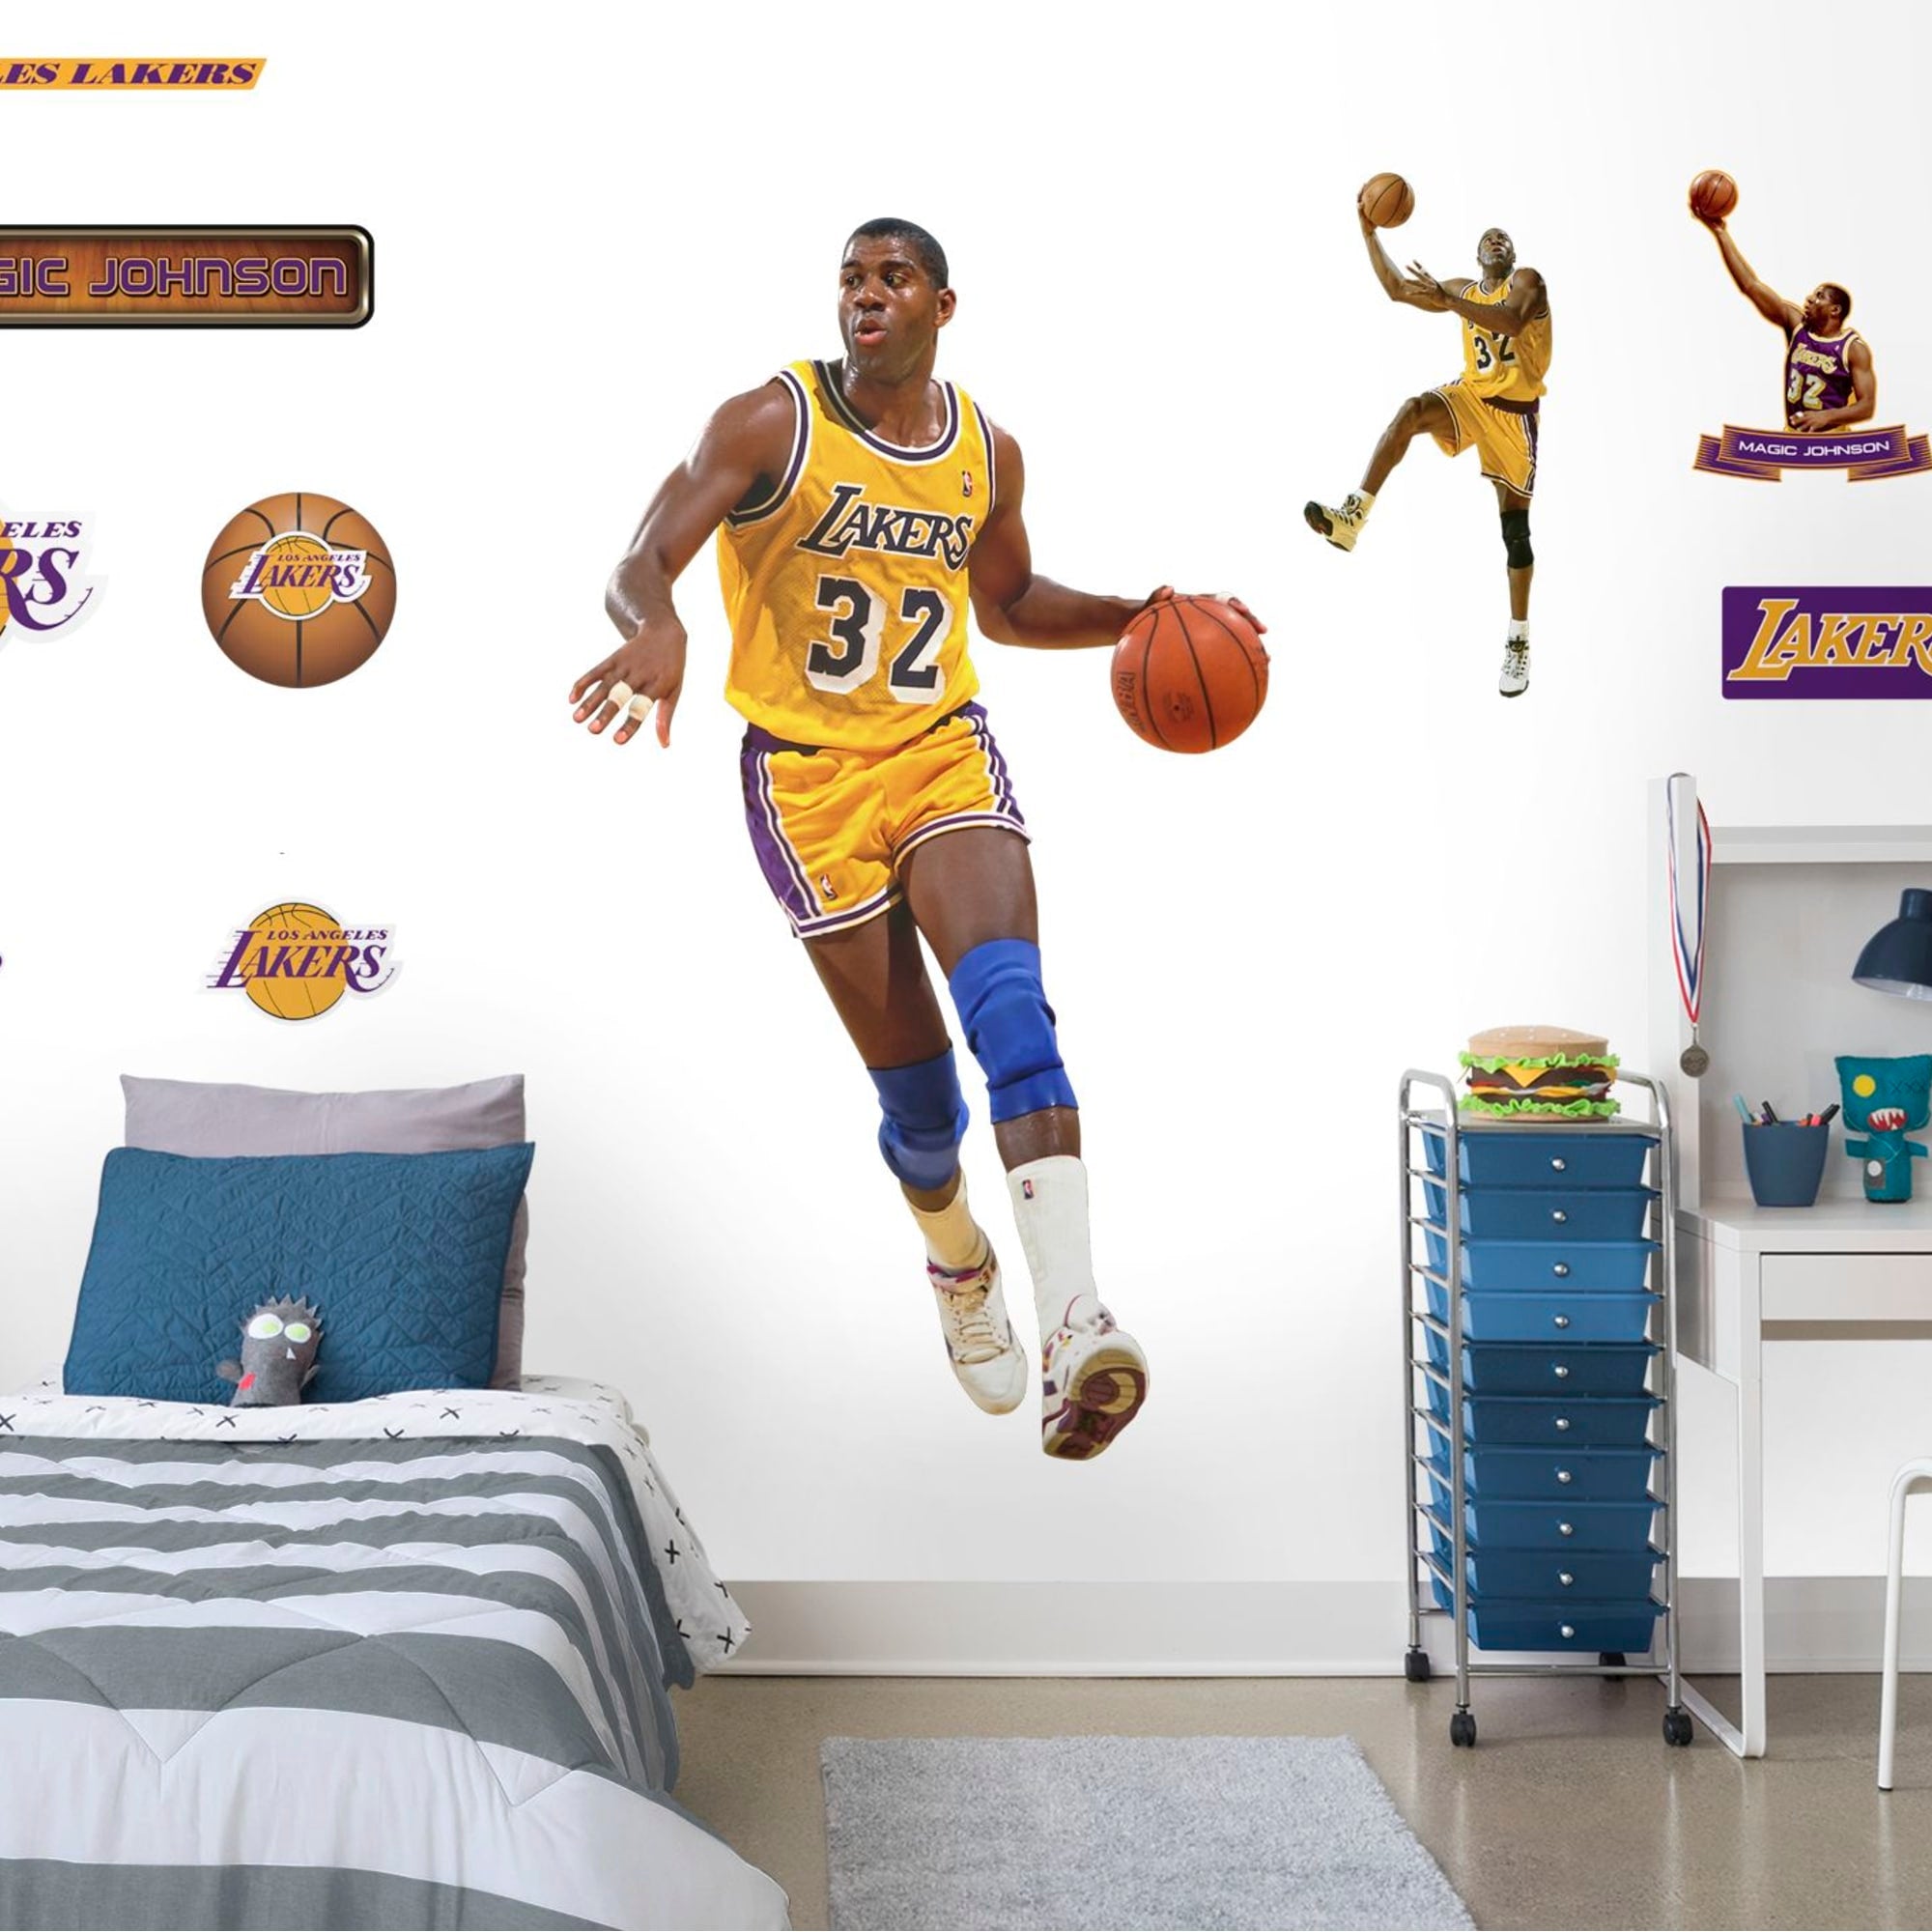 Magic Johnson for Los Angeles Lakers - Officially Licensed NBA Removable Wall Decal Life-Size Athlete + 8 Decals (44"W x 78"H) b